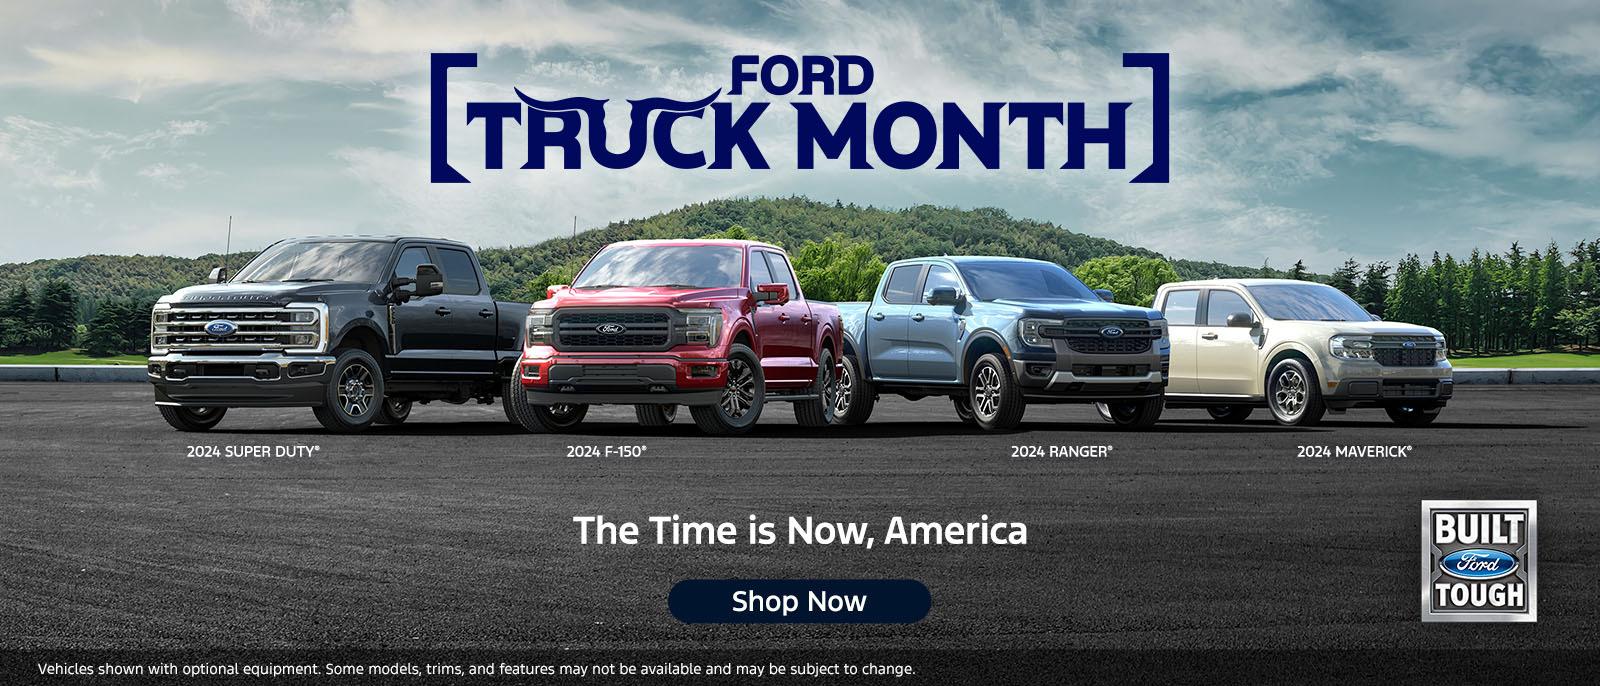 Ford Truck Month